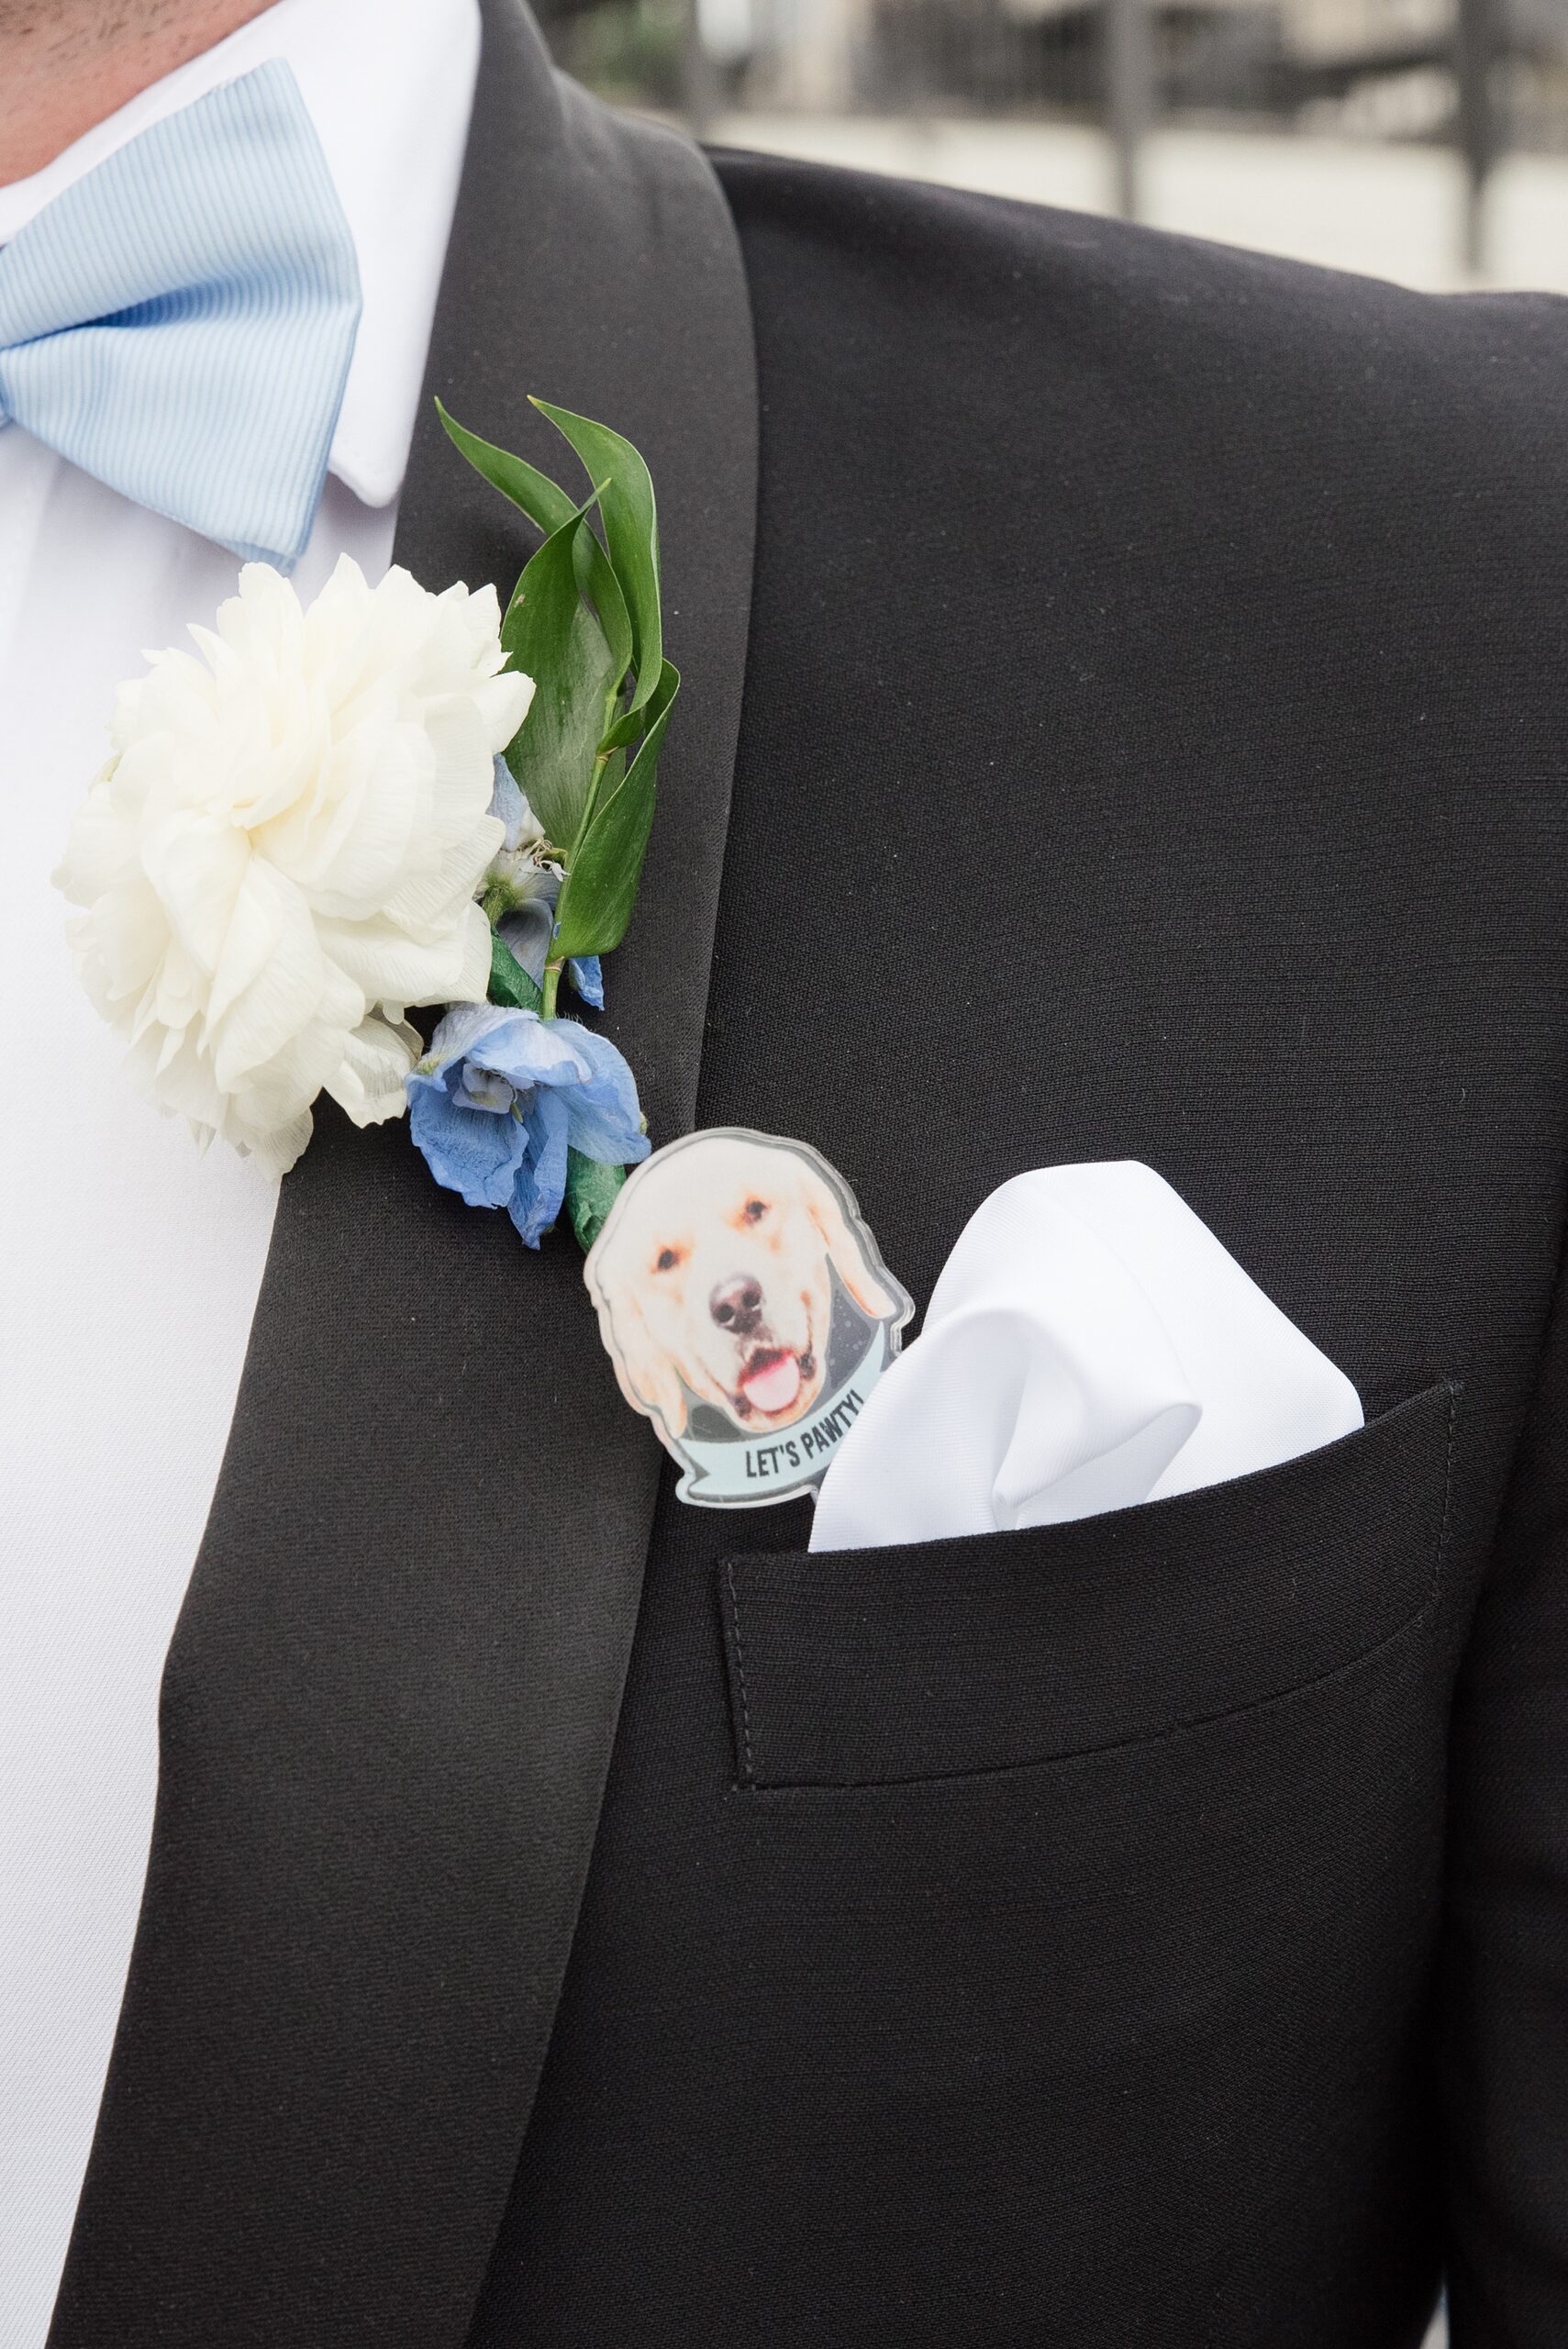 Details of a groom with a dog party favor in his pocket by a boutonniere